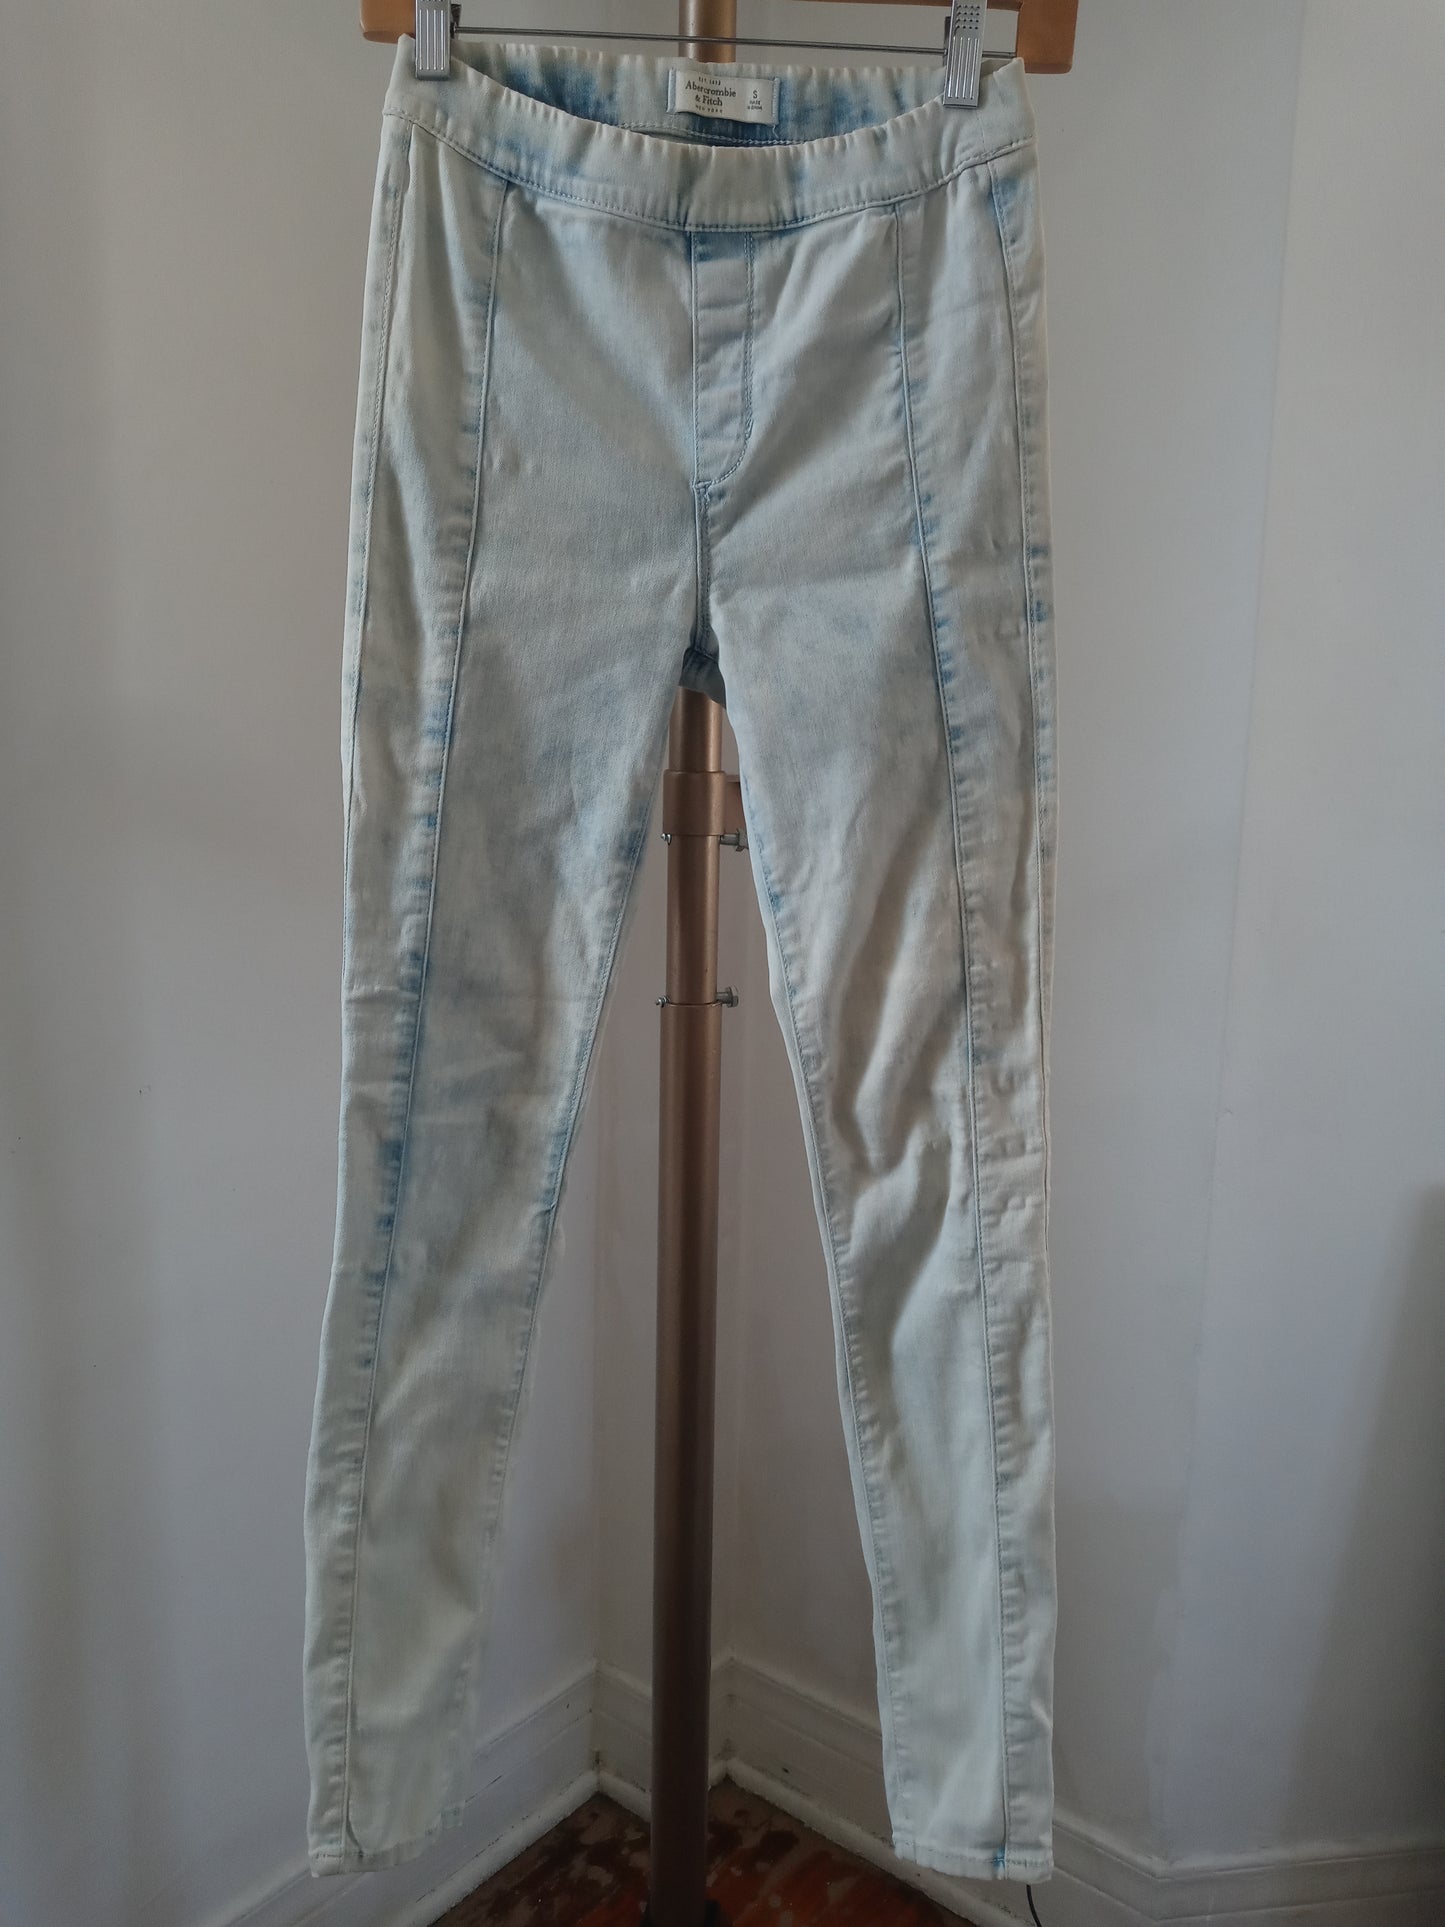 Abercrombie & Fitch New York Kid's Girl's Jean Pants - Size Small - Pre Owned - Fair Condition